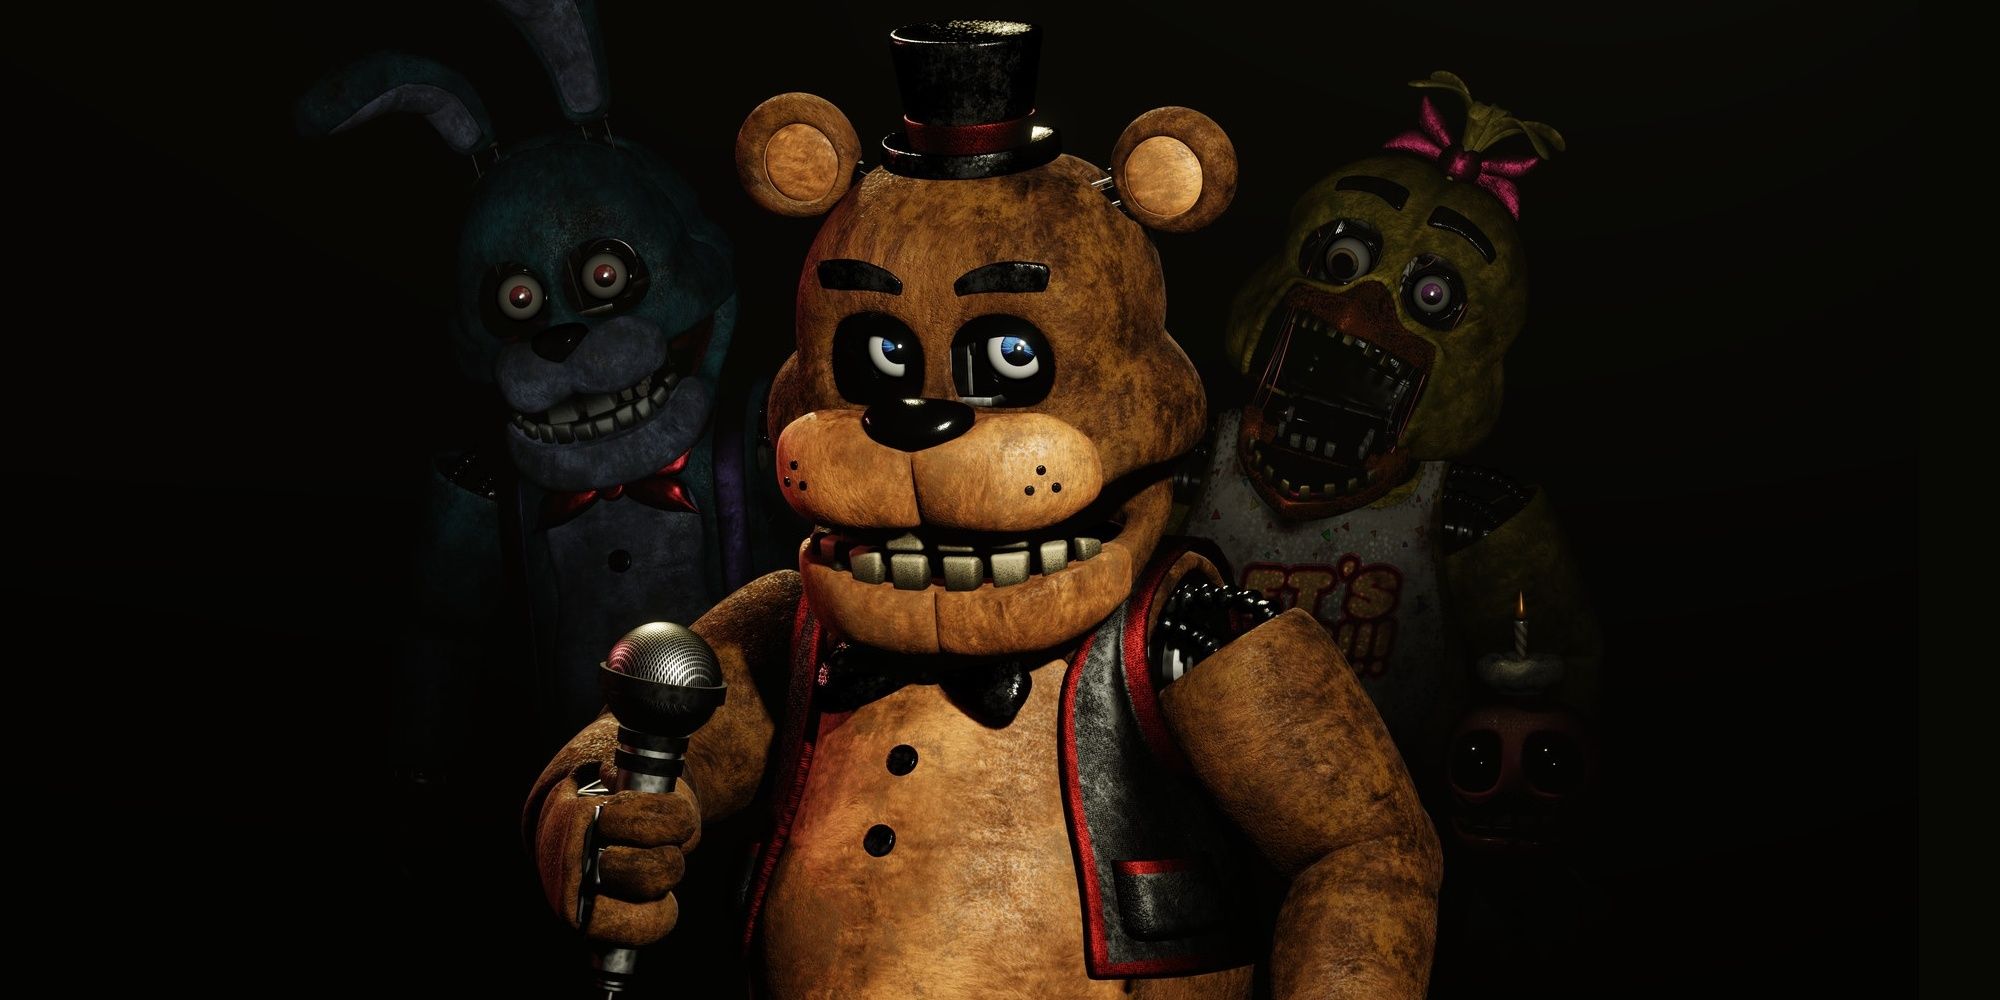 Five Nights At Freddy's Bonnie, Freddy, Chica, and Mr. Cupcake on stage